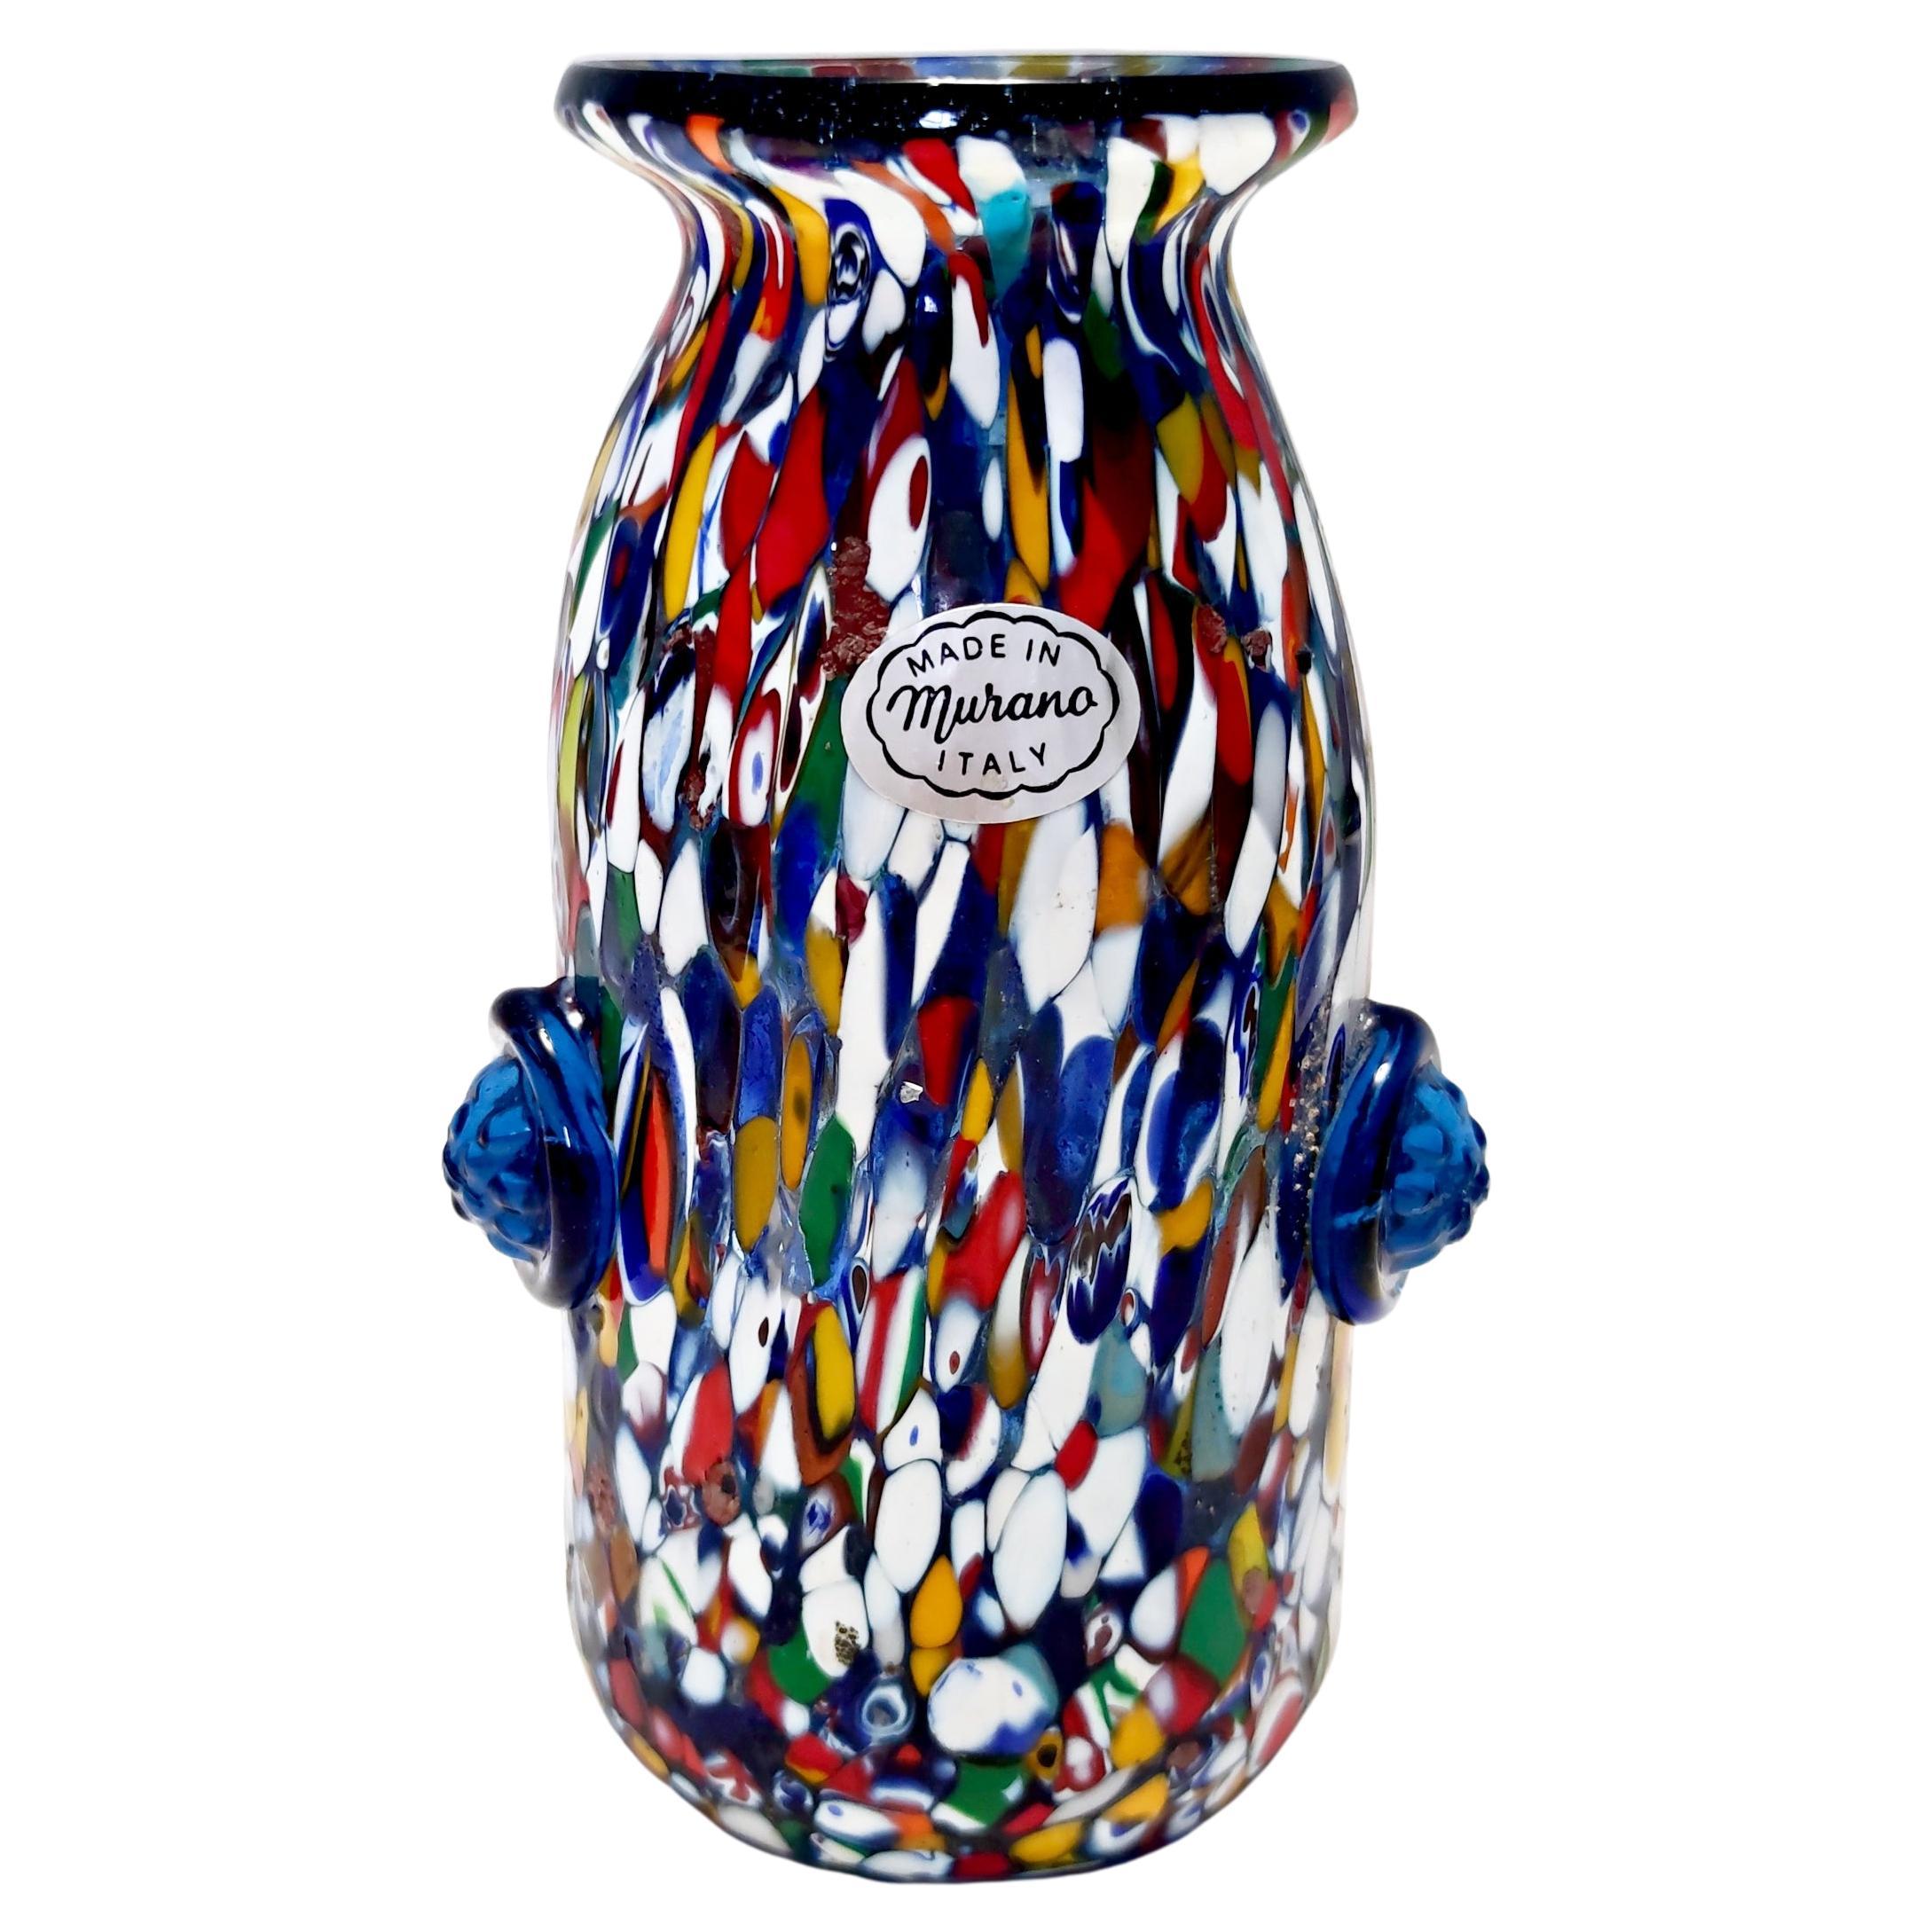 Vintage Murano Glass Vase Attributed to Fratelli Toso with Murrines, Italy For Sale